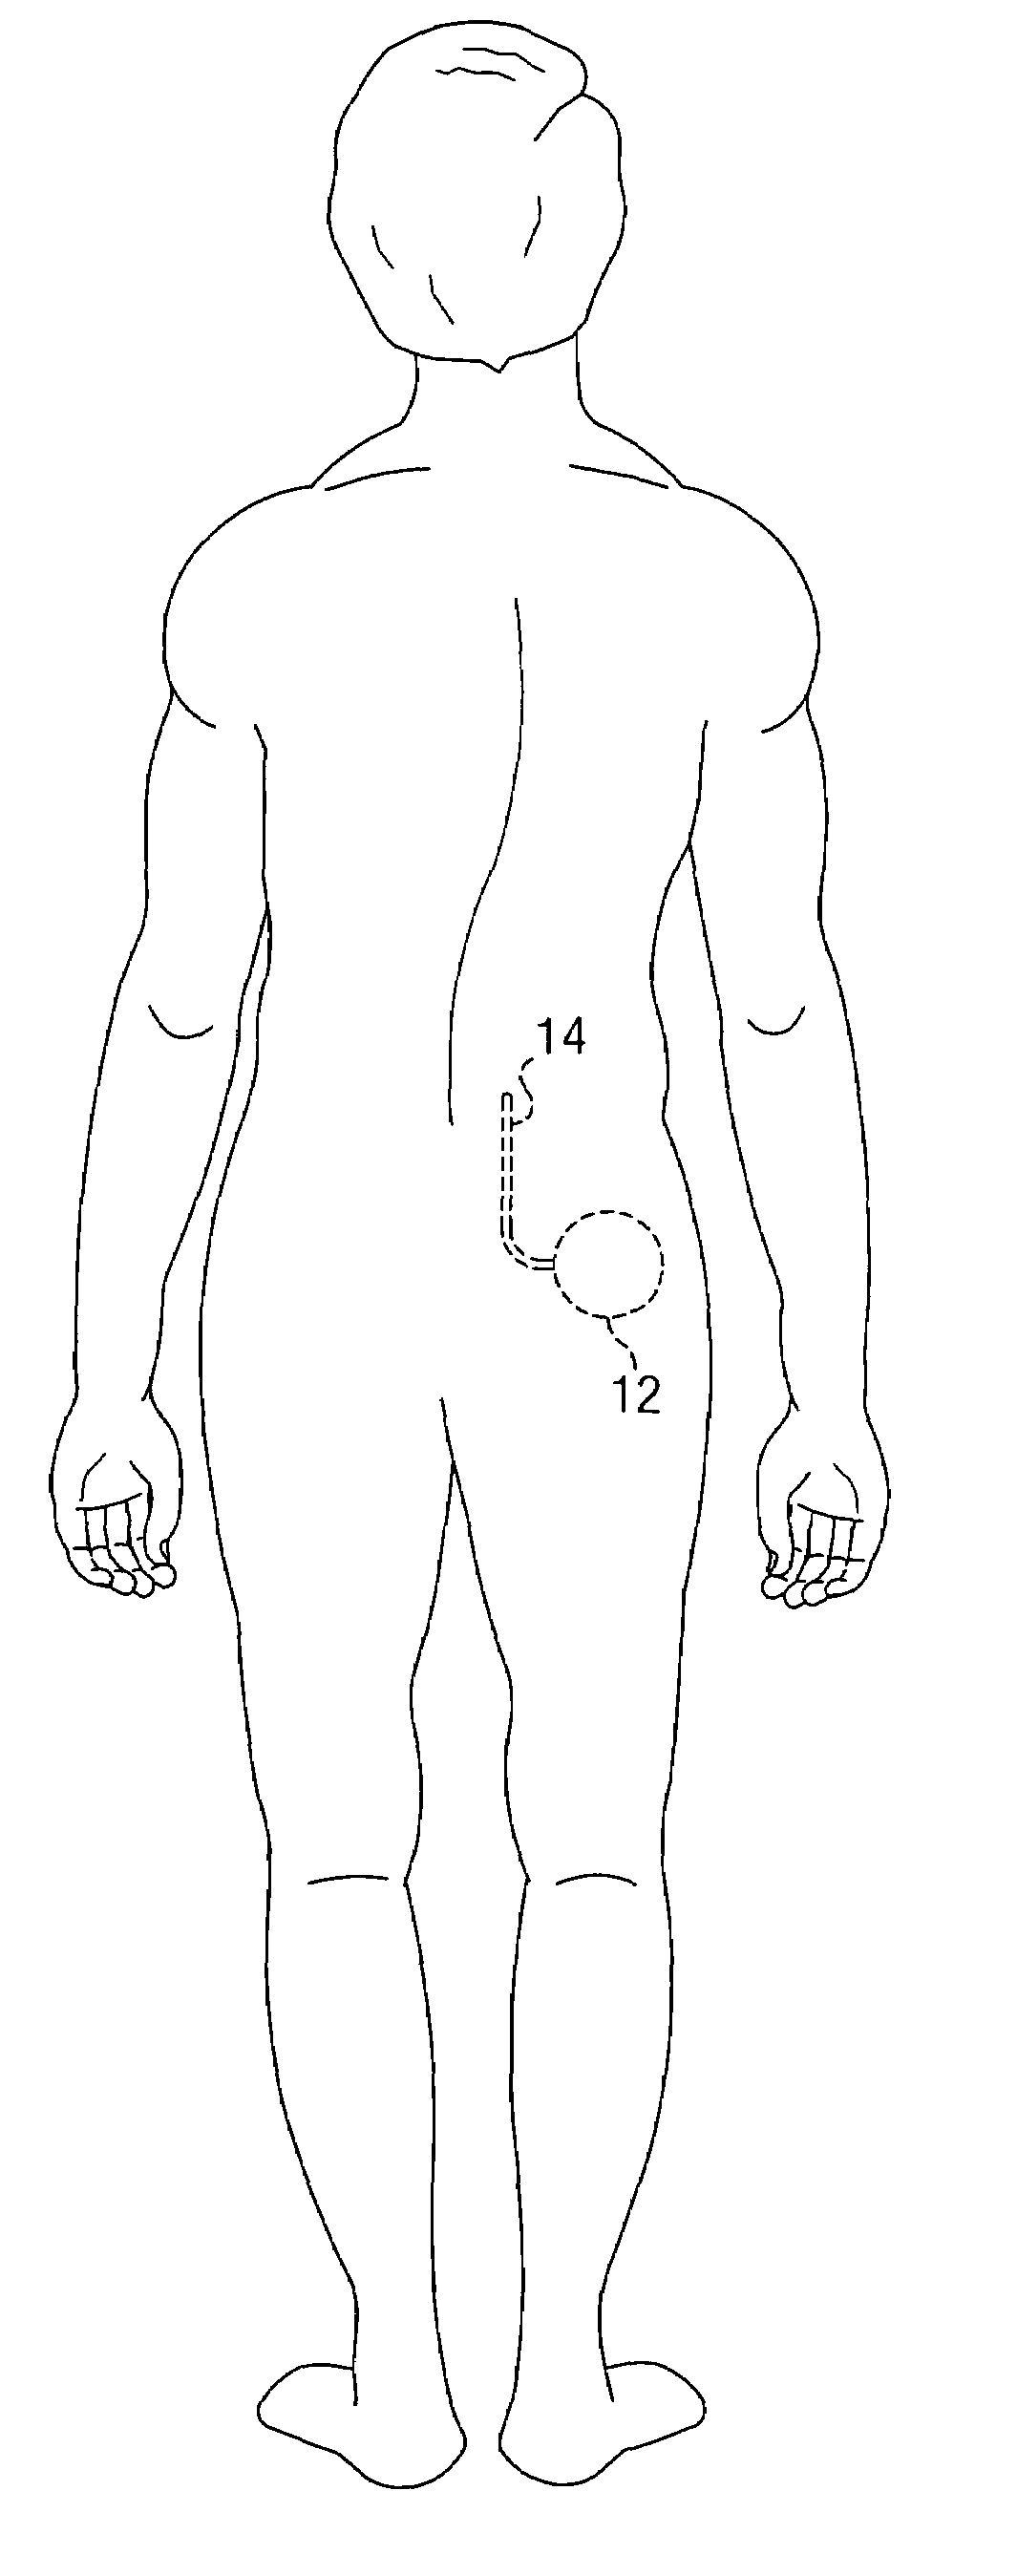 System and method for neurological stimulation of peripheral nerves to treat low back pain